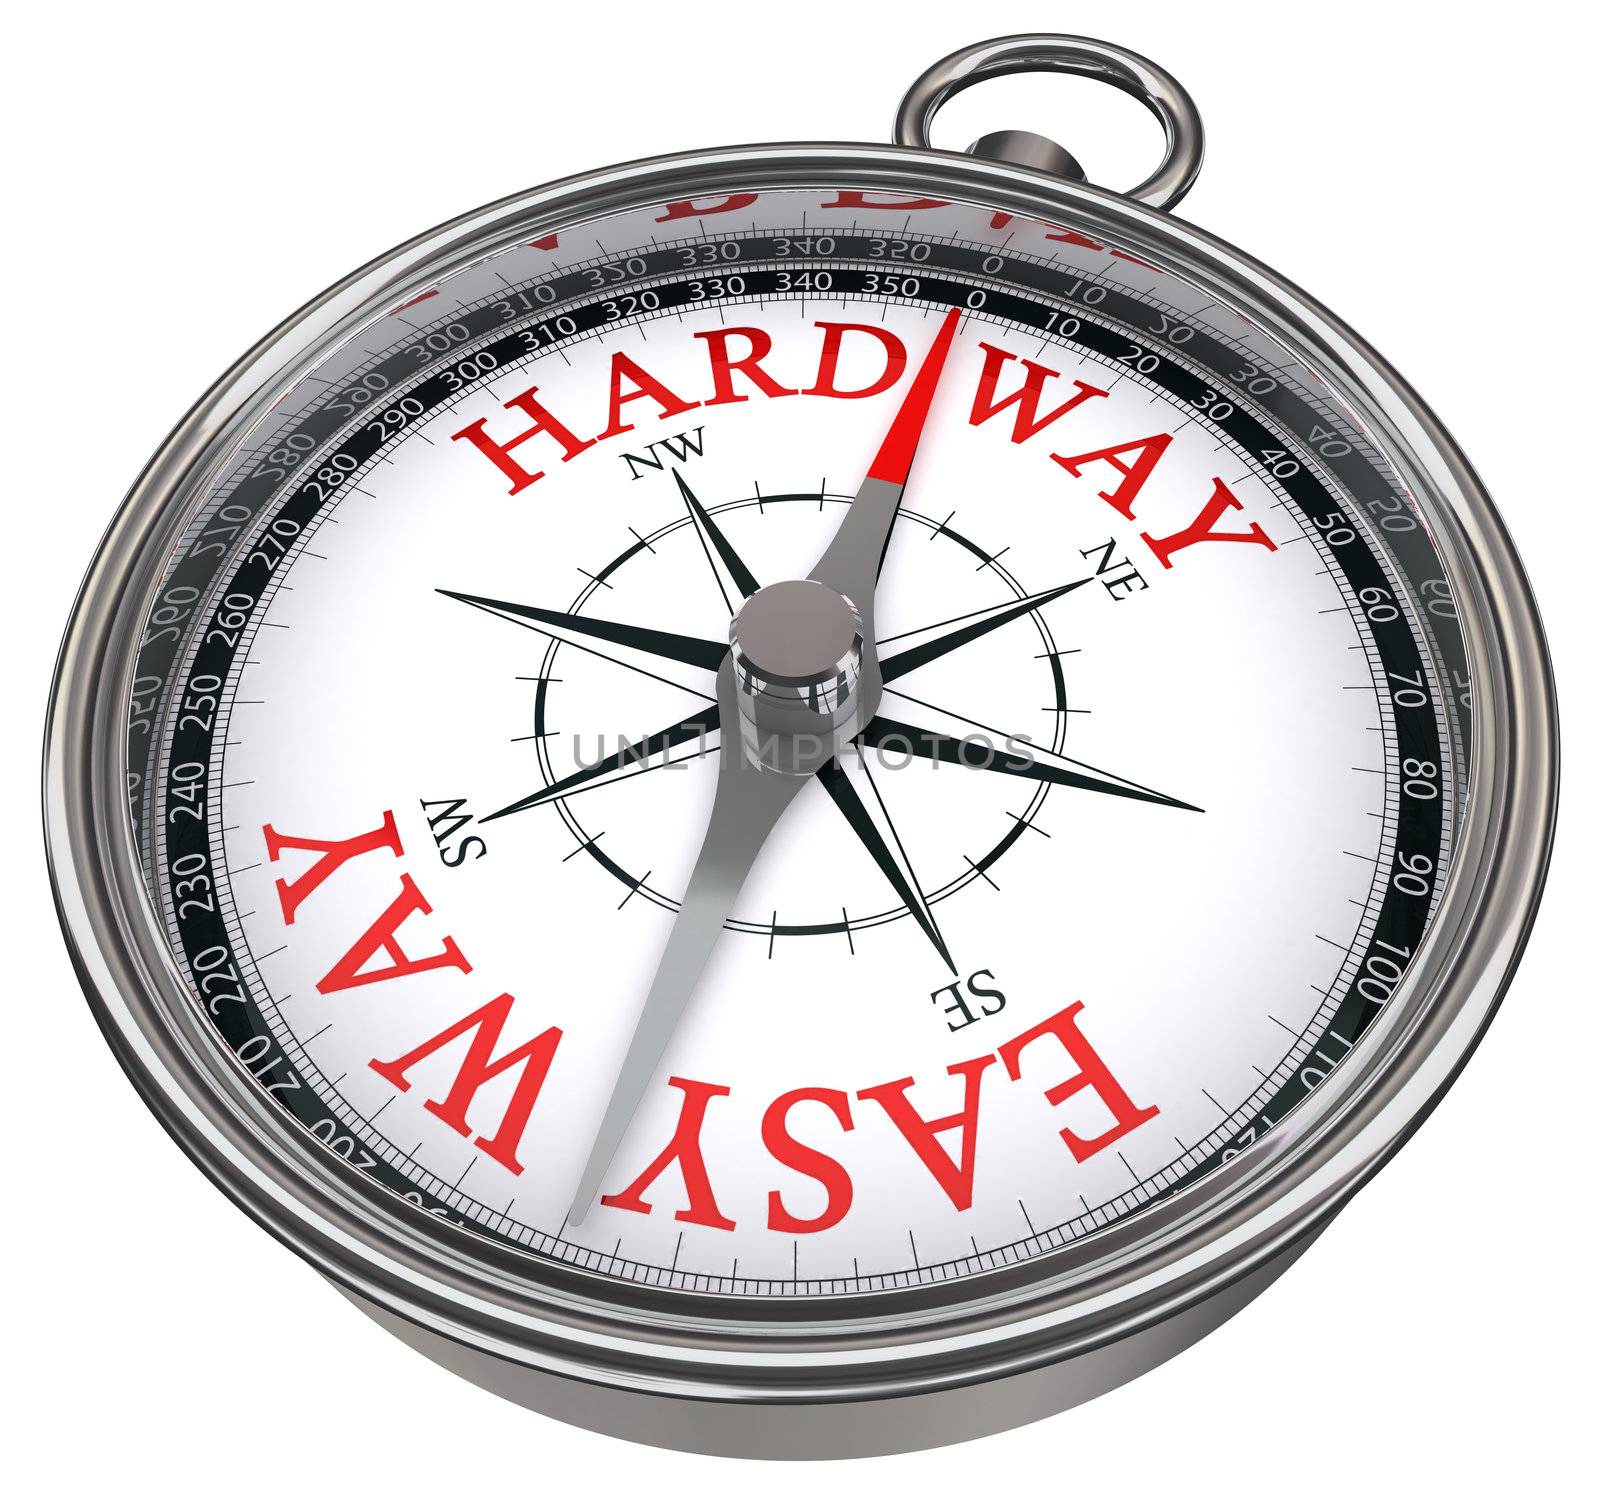 easy versus hard way dilemma concept compass with red letters isolated on white background